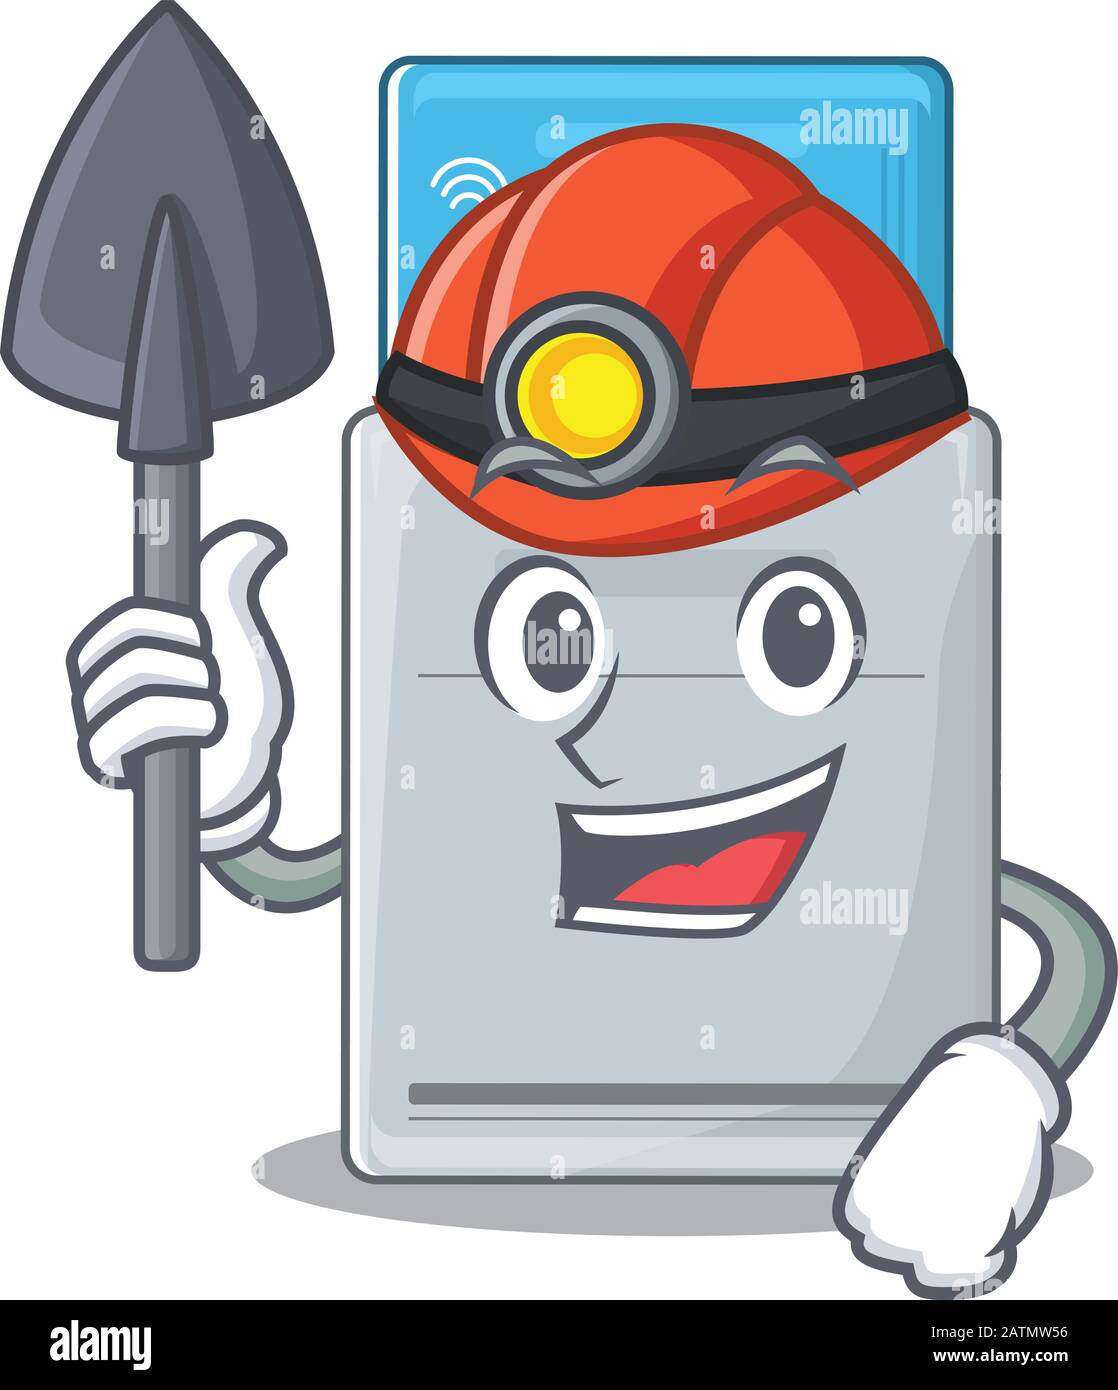 Cool clever Miner key card cartoon character design Stock Vector Image ...